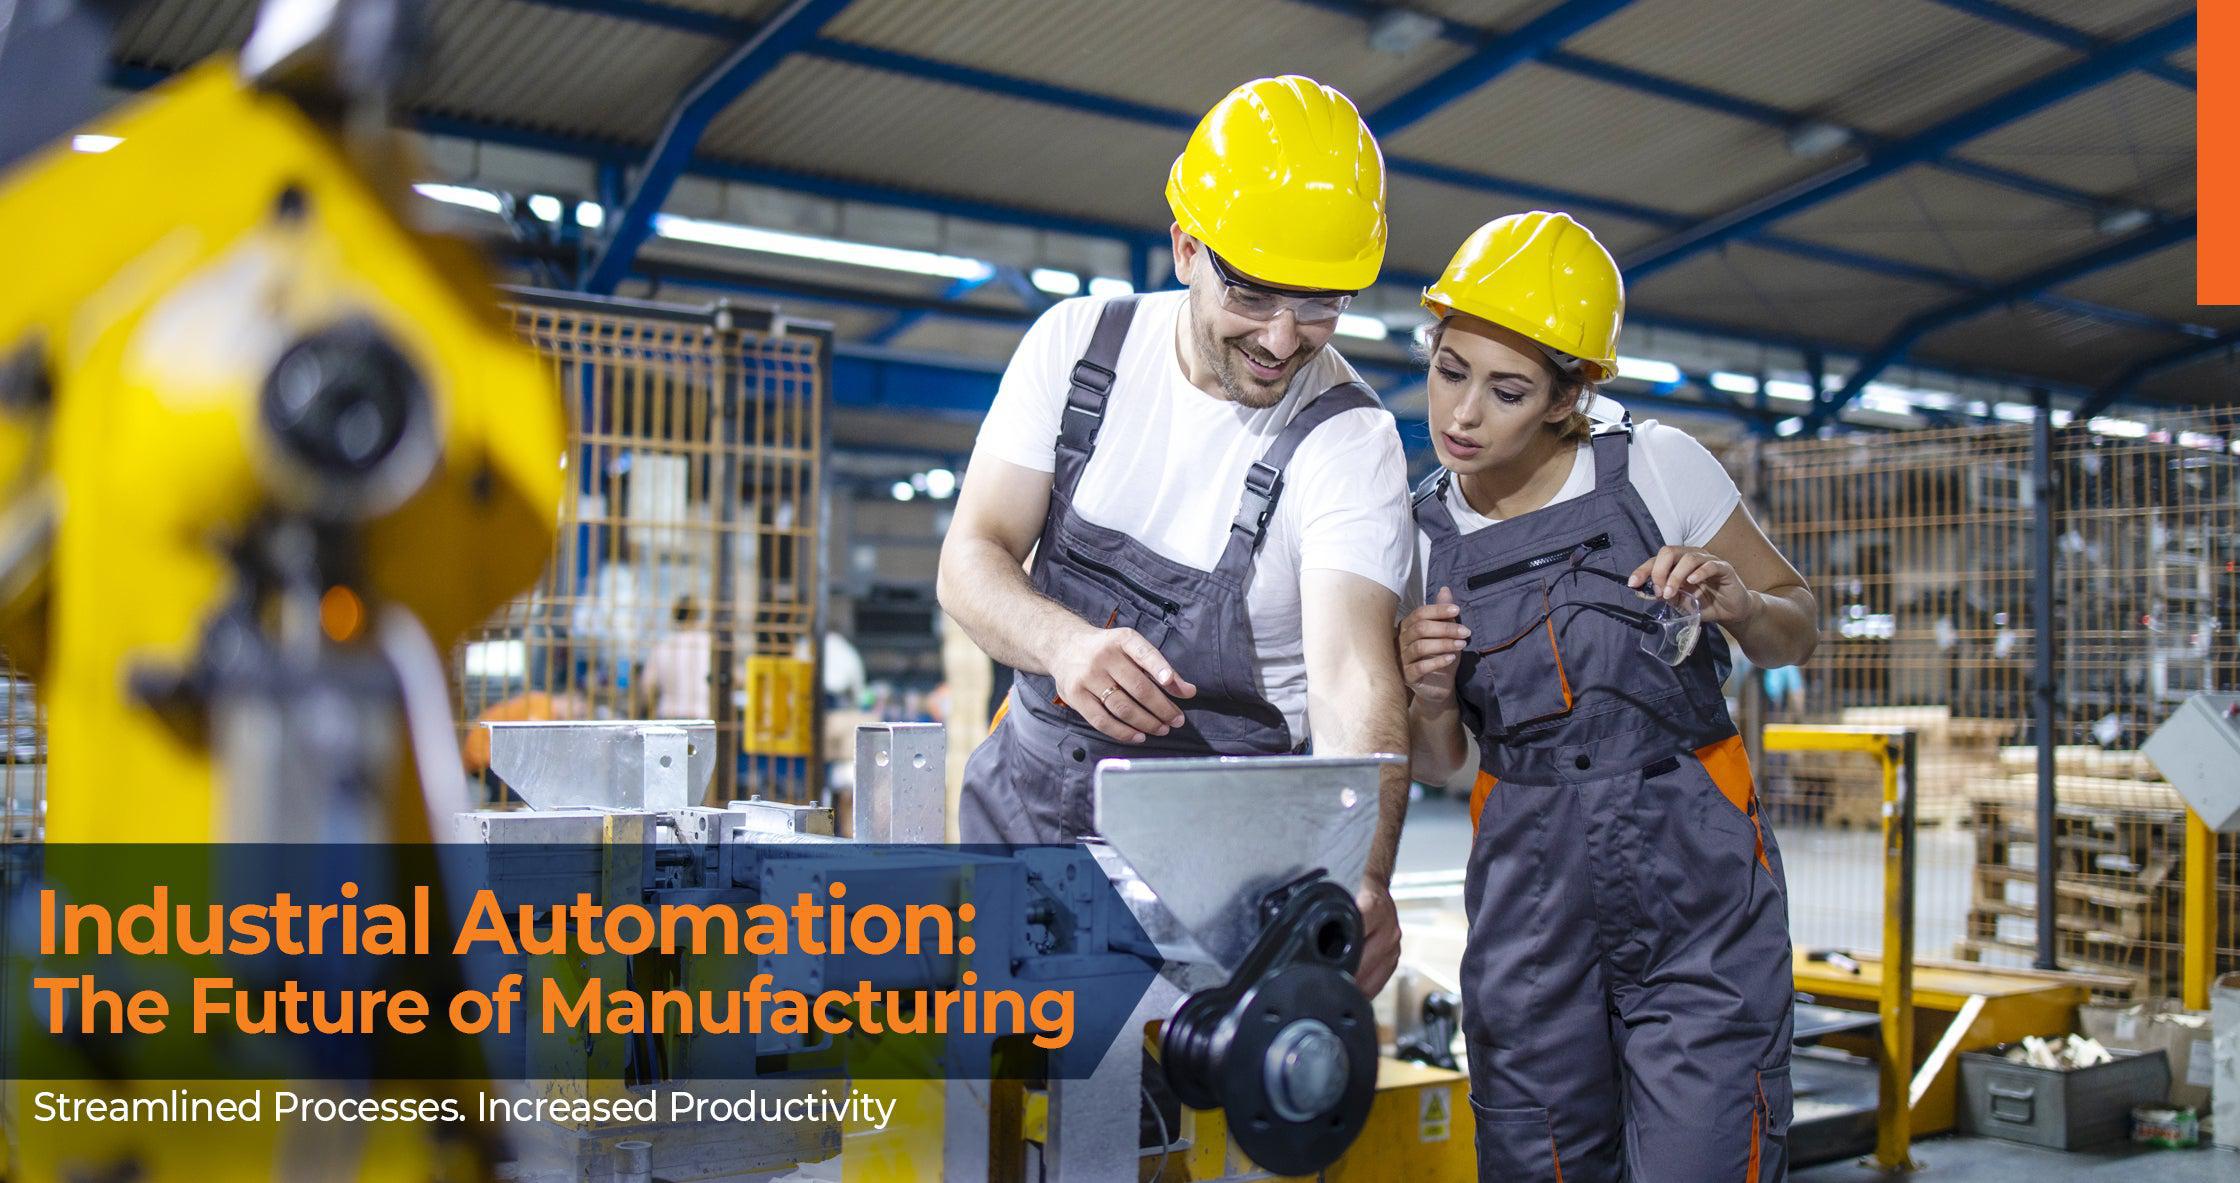 Industrial Automation: The future of manufacturing. Streamlined Processes. Increased Productivity.